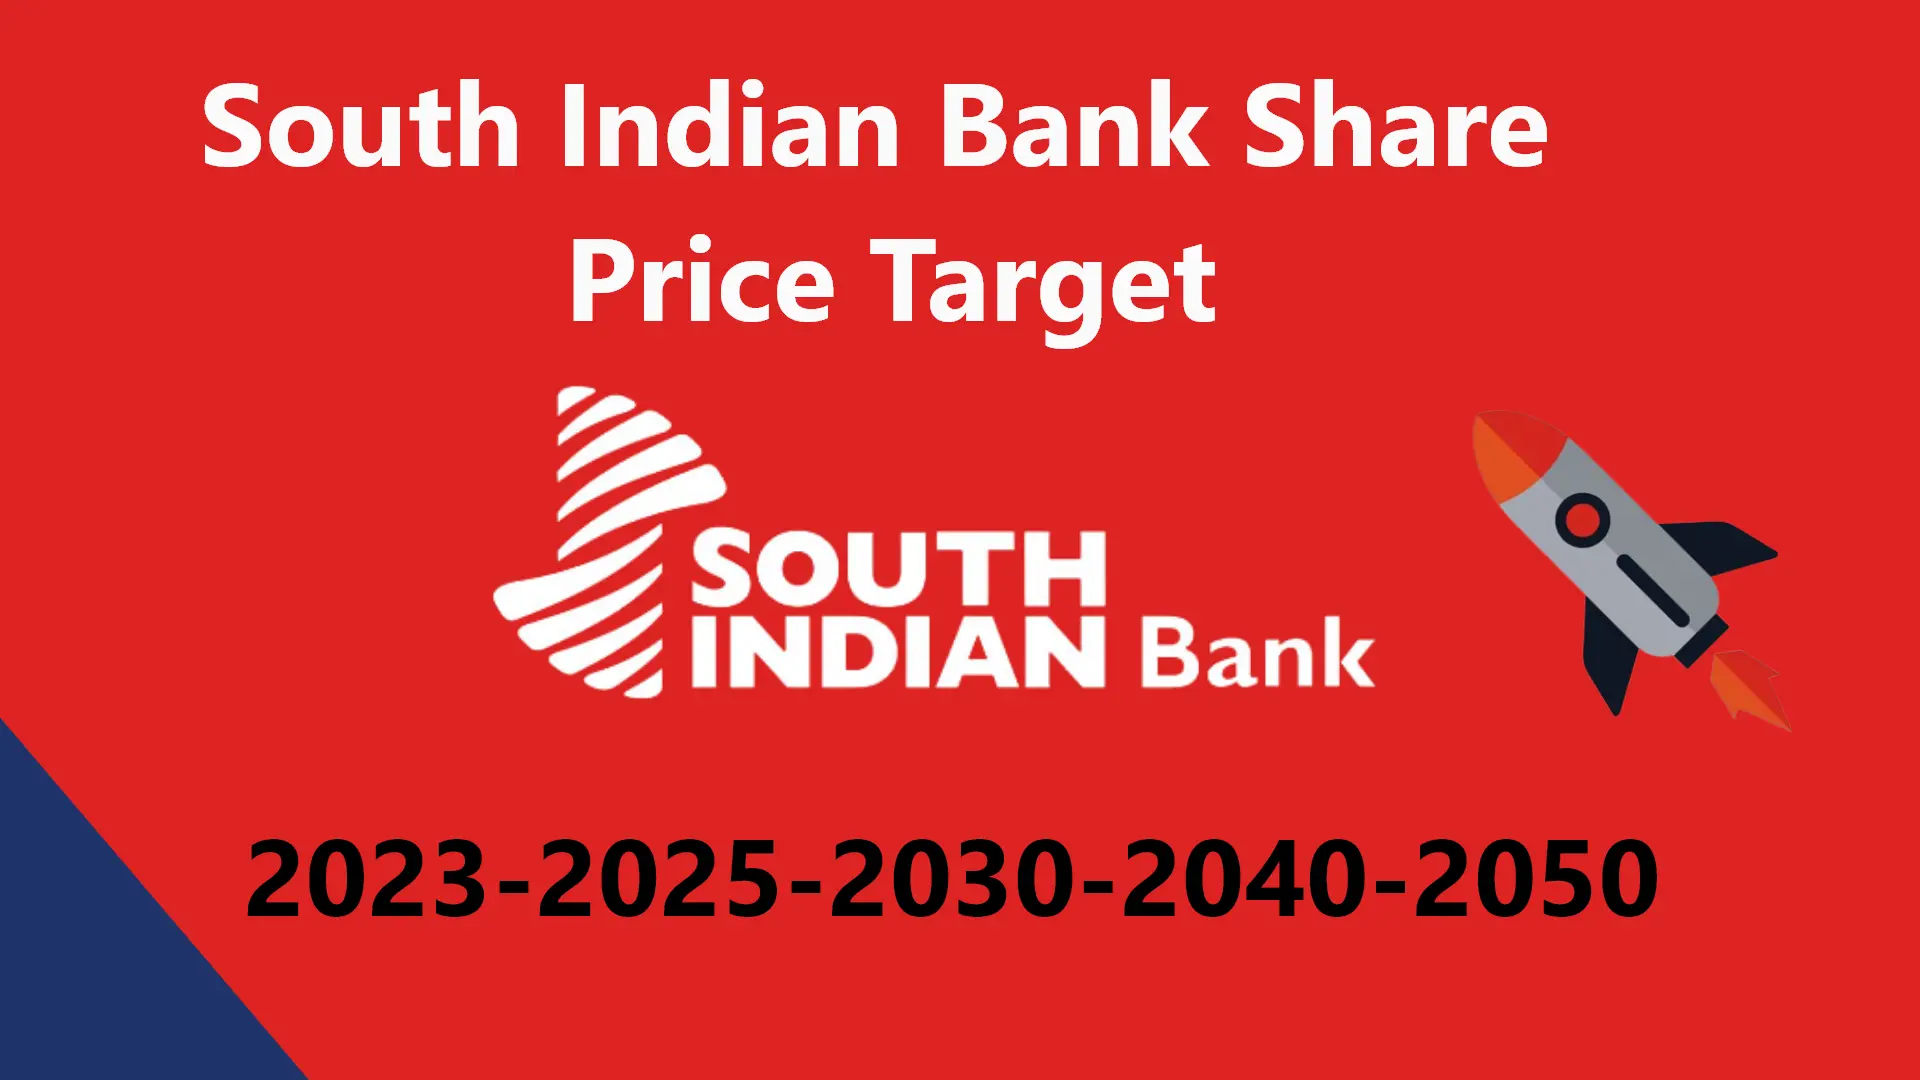 South Indian Bank Share Price Target 2025203020402050